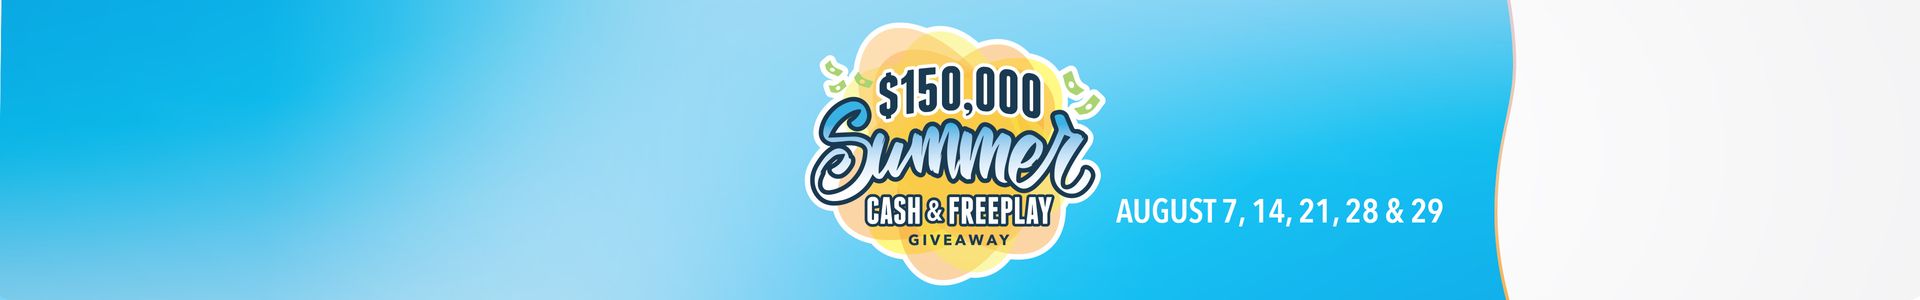 $150,000 Summer Cash and FREEPLAY Giveaway